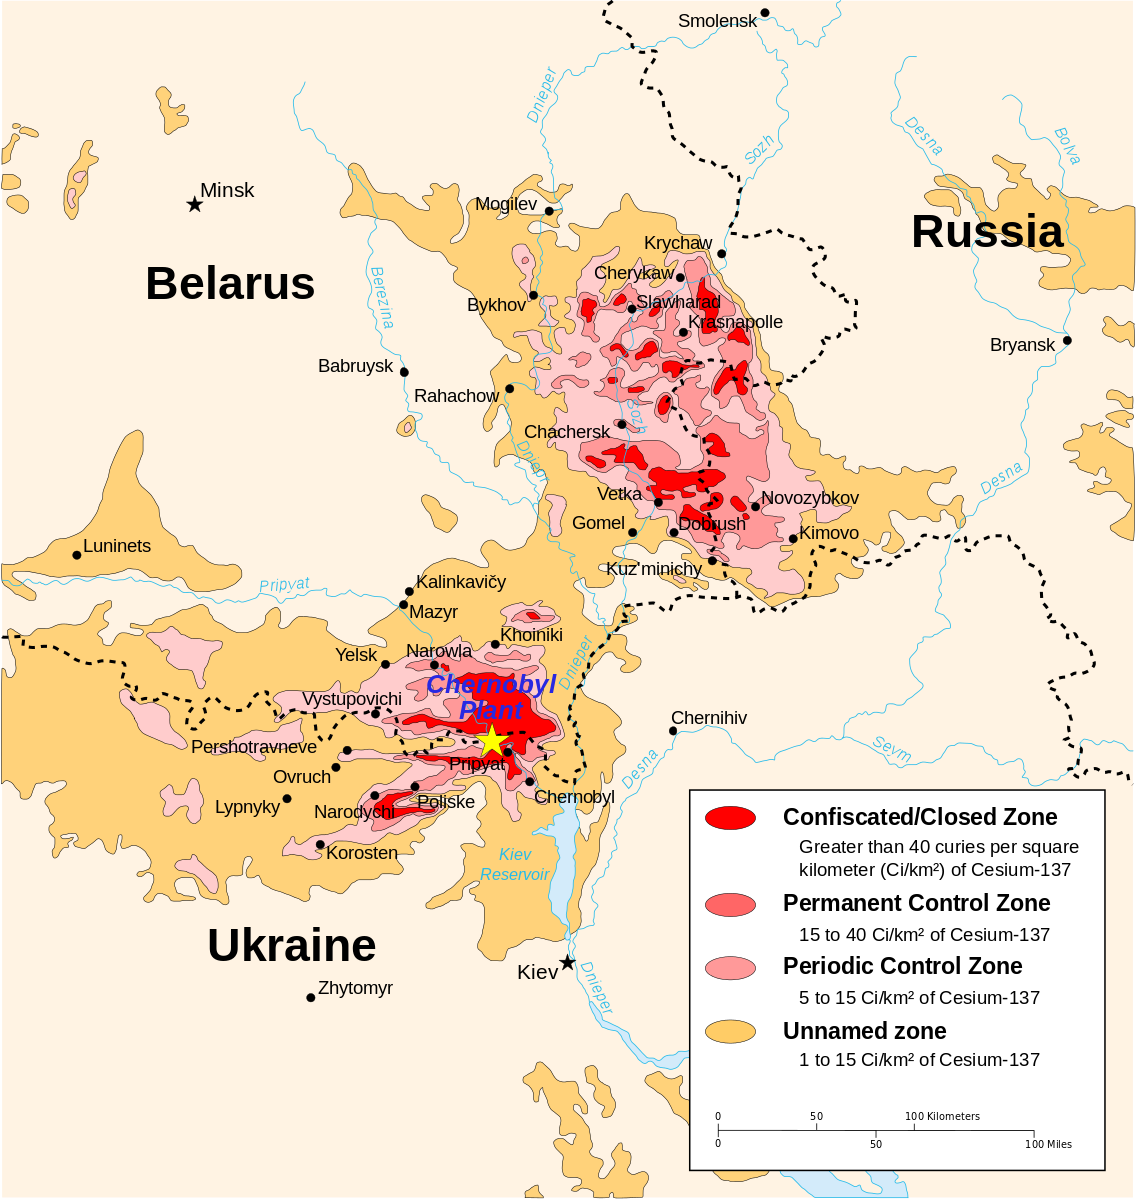 Chernobyl radiation map illustrating various zones of human activity post disaster. Areas closer to disaster zone have much higher concentration of radiation leading to more sever access to the site.